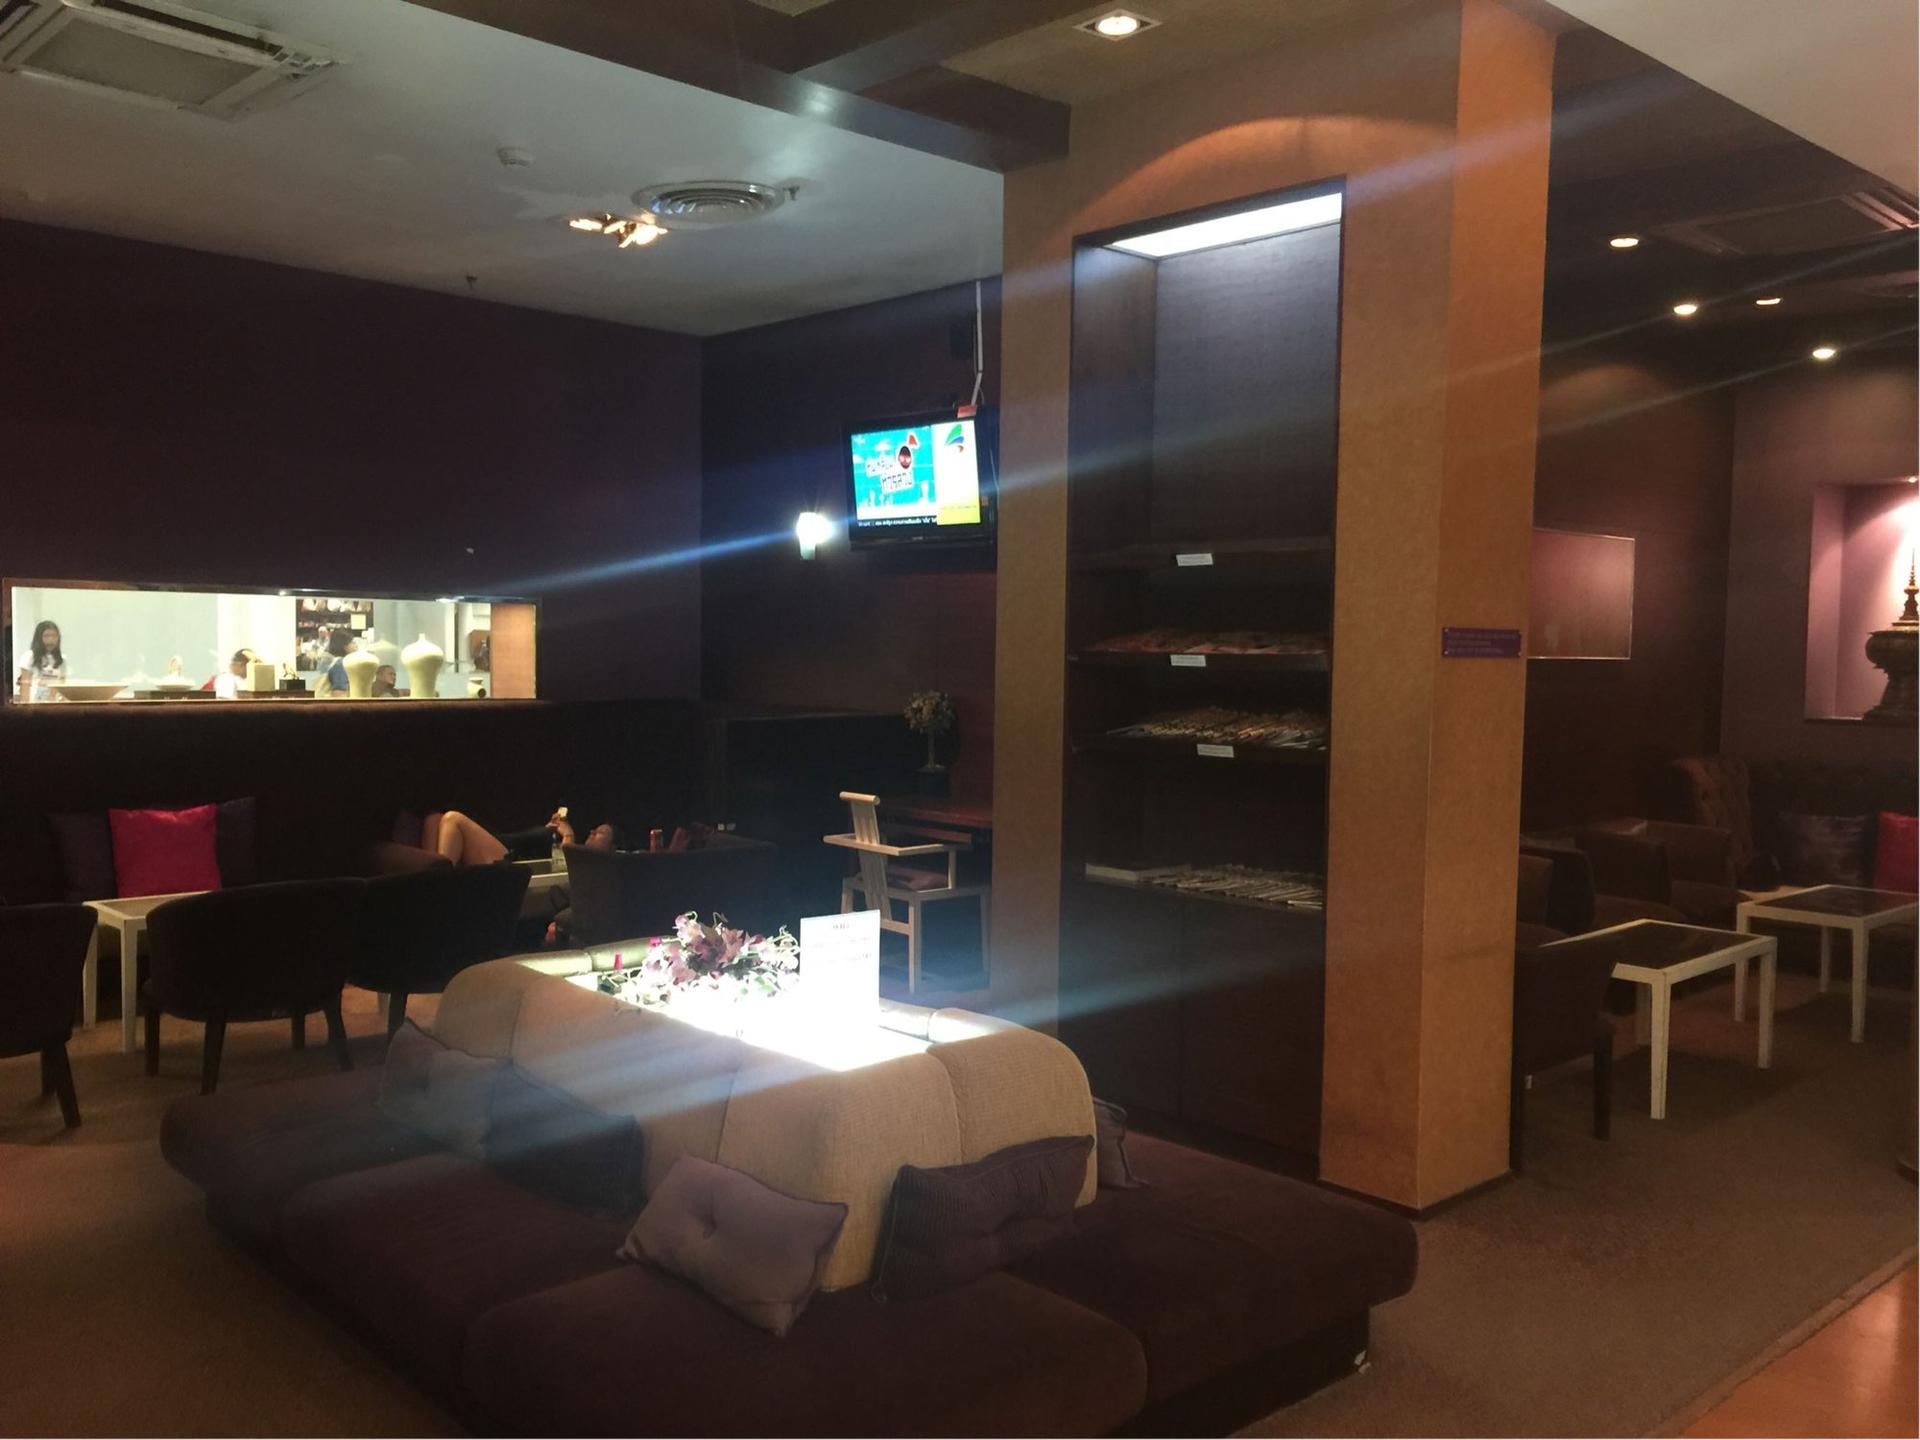 Thai Airways Royal Orchid Lounge image 12 of 22